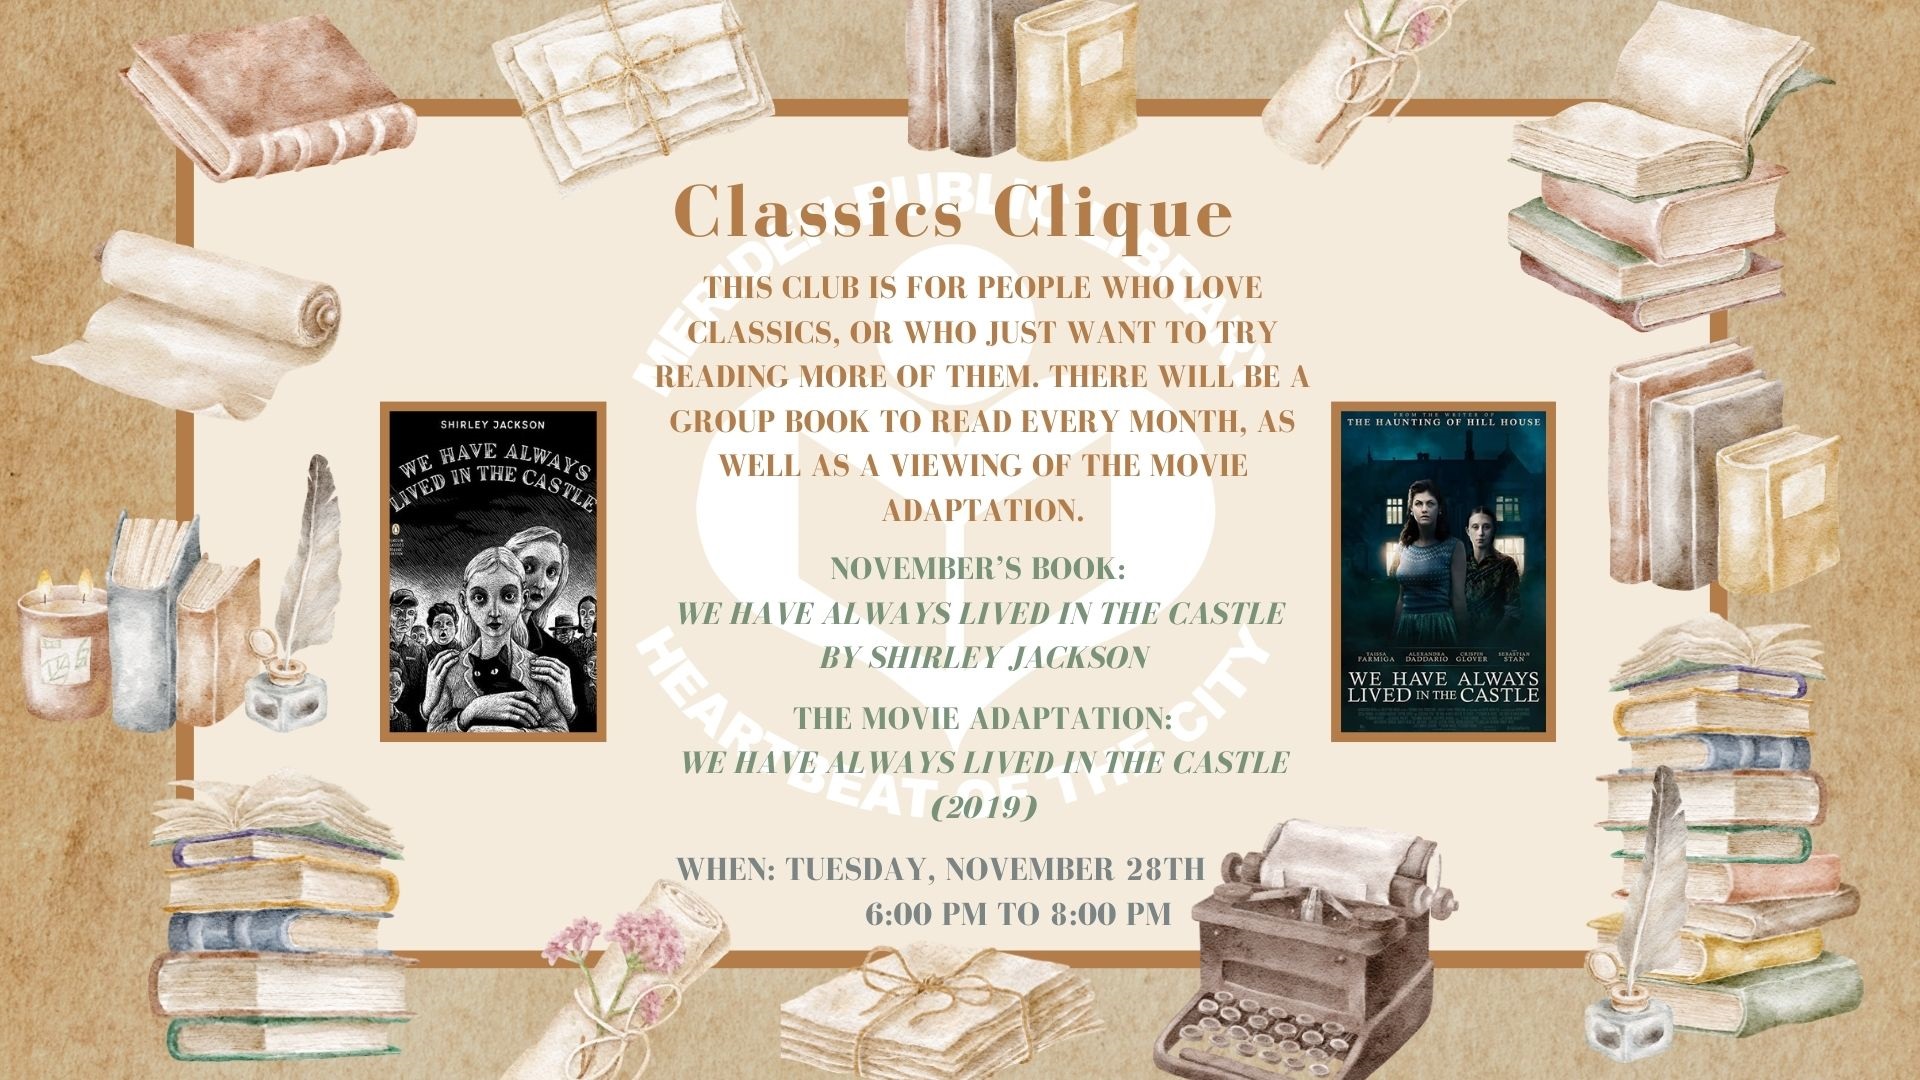 Books and a typewriter adorn the frame. "Classic Clique" is written in the middle along with a description of the club. The MPL logo is faded but visible behind the writing.